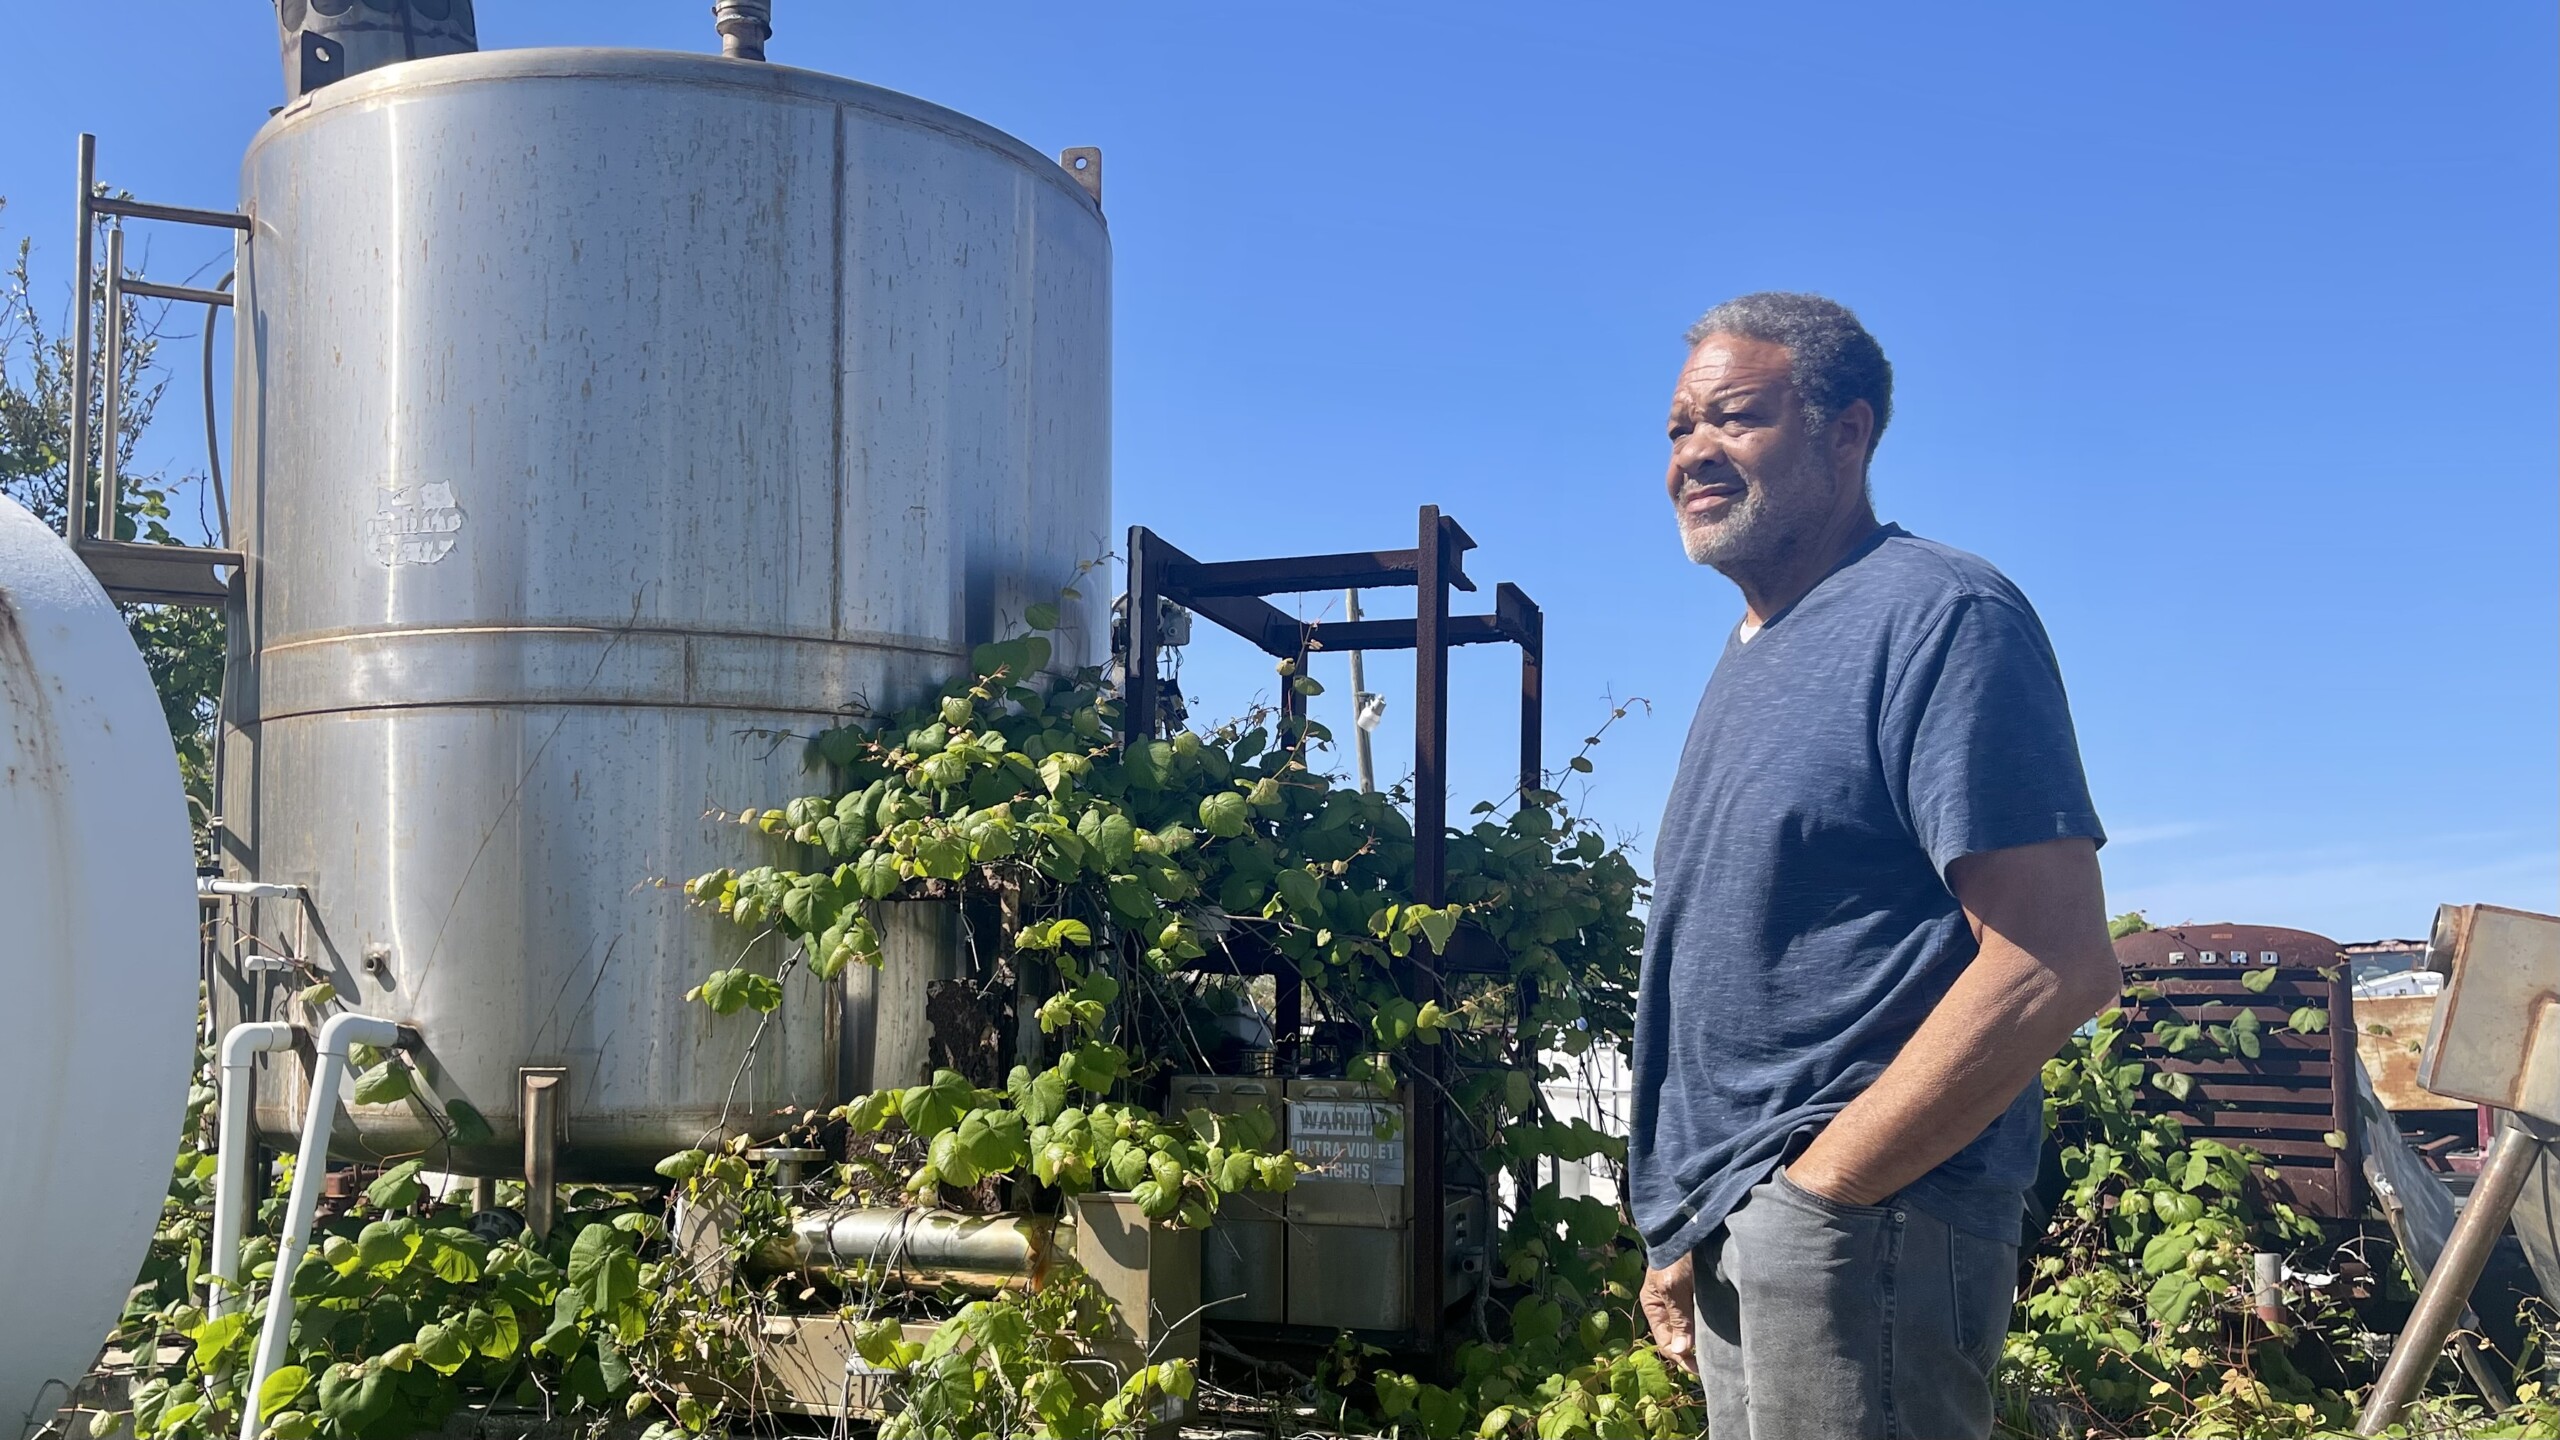 An older African-American man, Bobby Dollison, stands in front of two large steel barrels with green shrubs growing around them on American Beach.